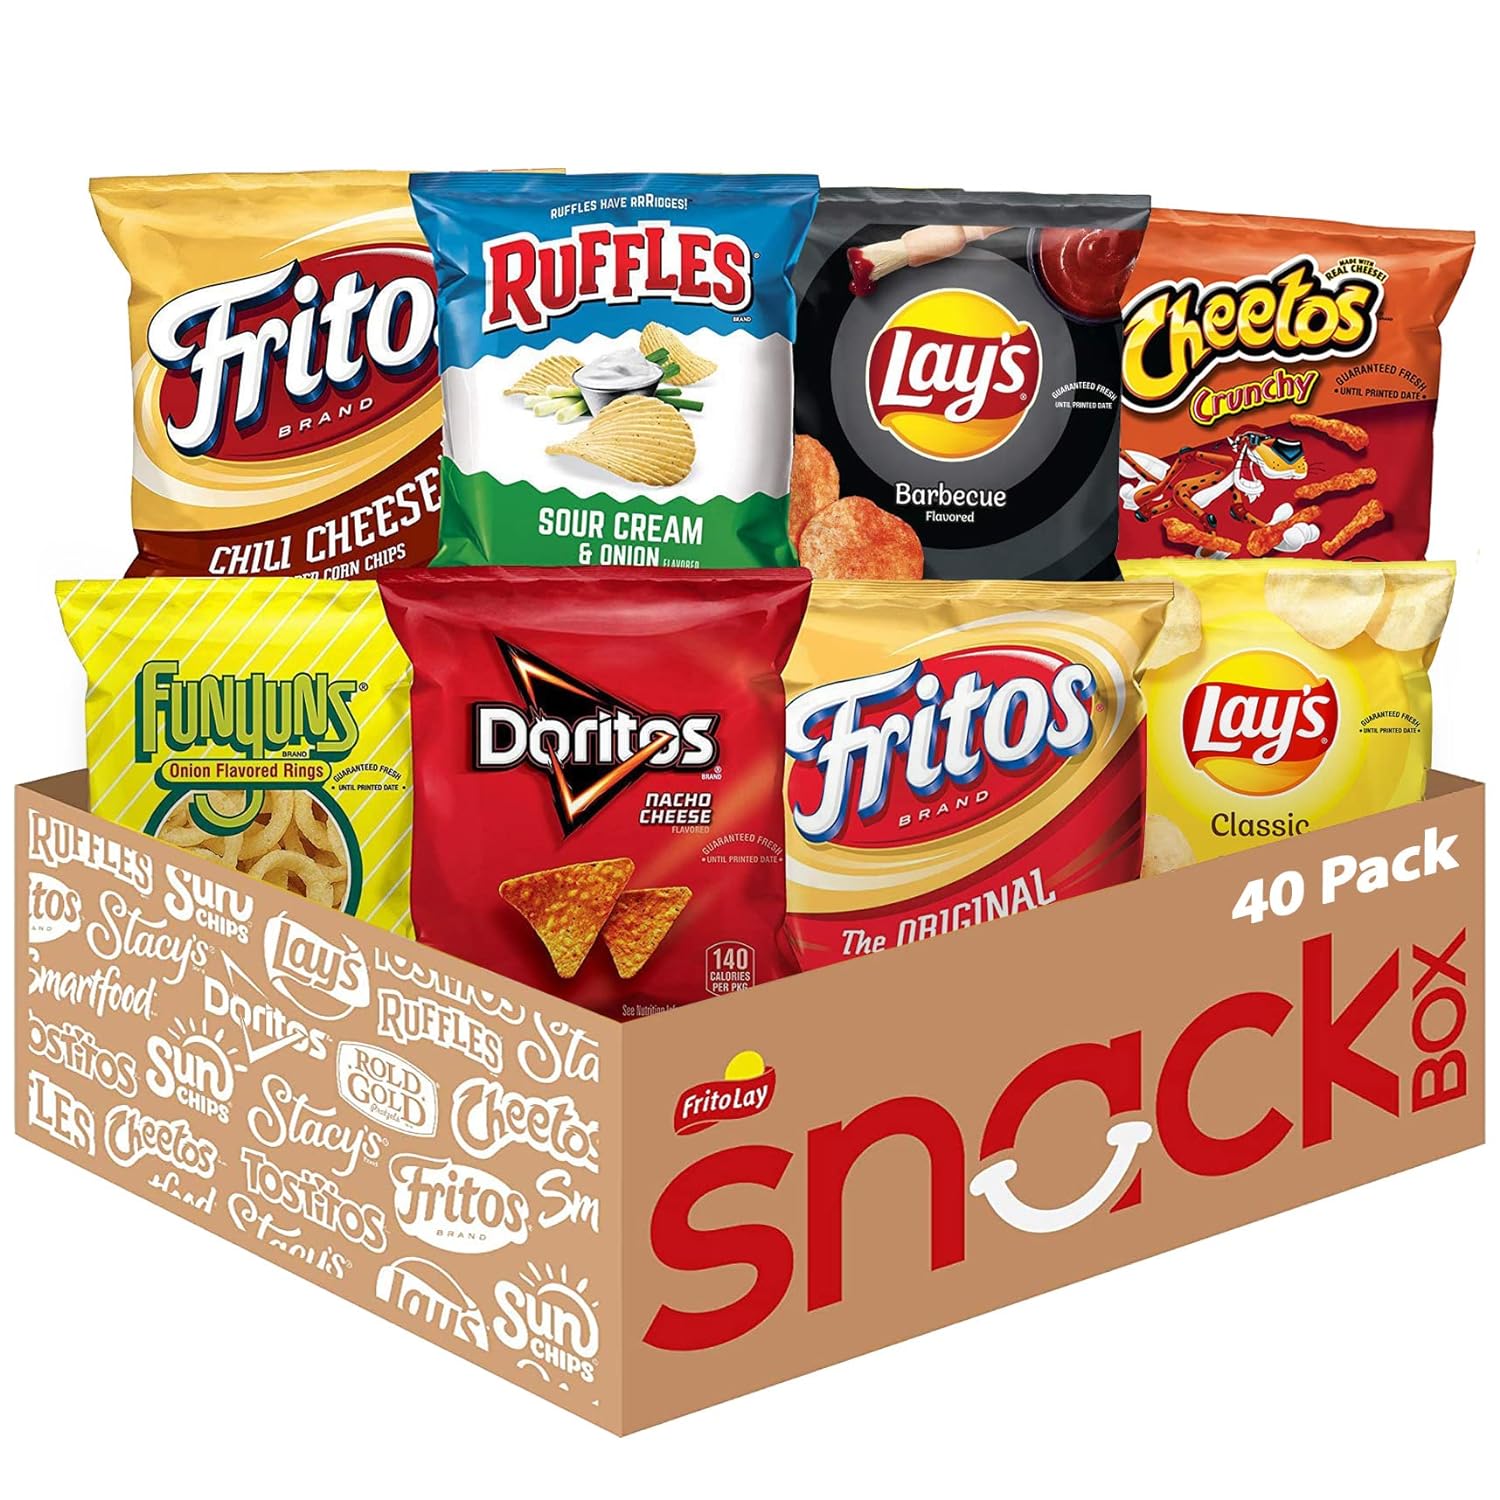 I ordered these because of the price. They don't say the expectation date is up on the packages. The Cheetos are stale. Ugh. Doritos were ok but now I am not going to try the rest. I took them to the salvation army and donated. Shame on you for selling items at a discount when they are ready to expire